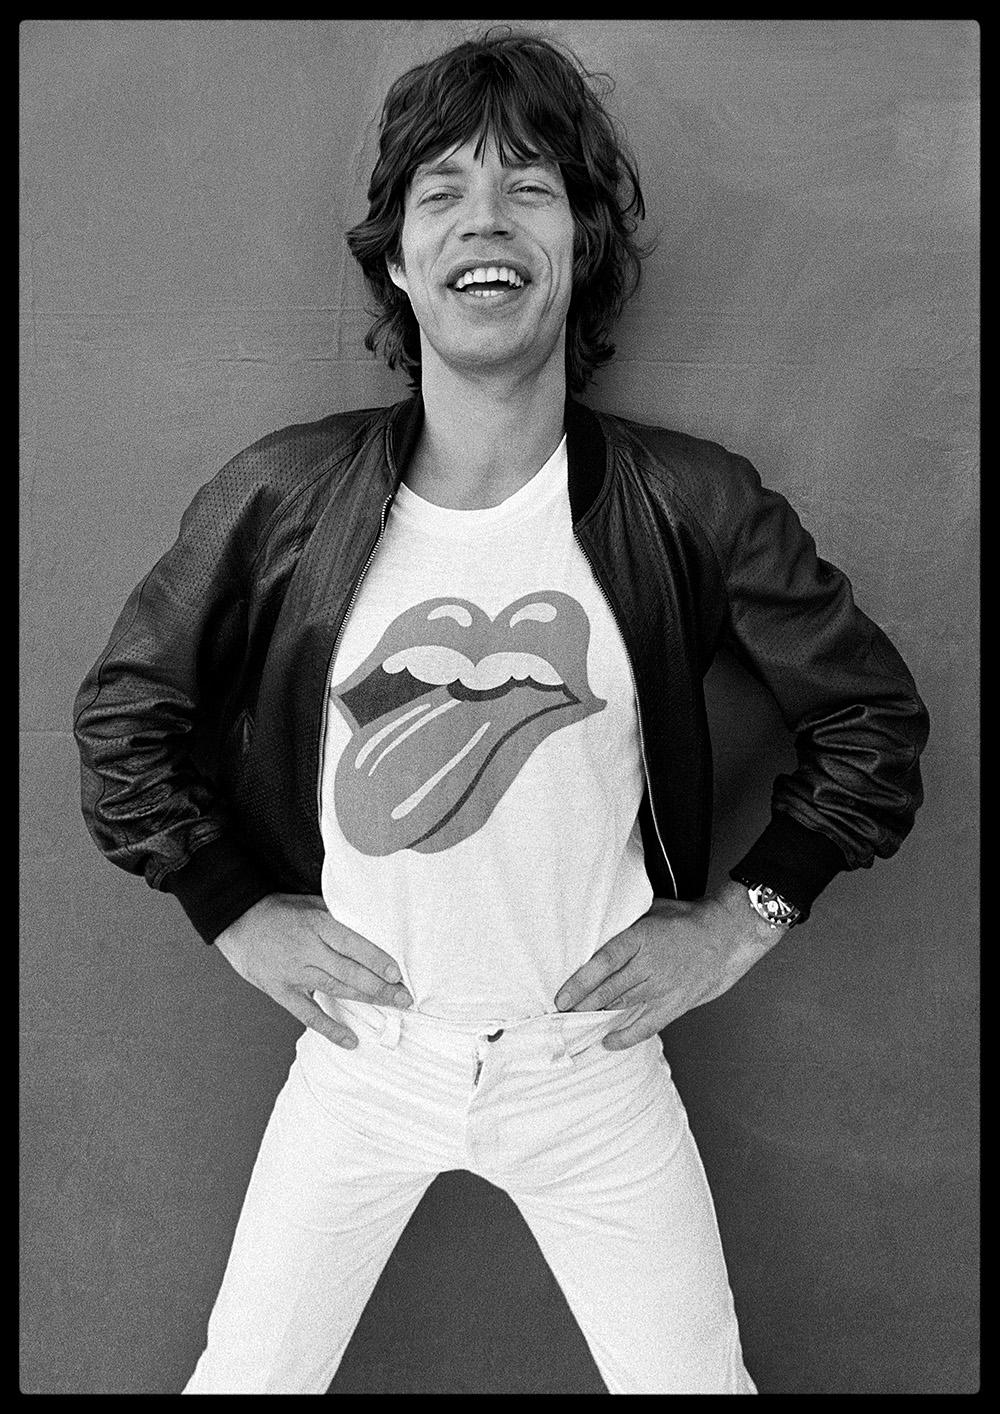 Mick Jagger Forty Licks

By Arthur Steel 

Paper size: 54 x 44.5" / 137 x 104 cm

Silver Gelatin Print
1970 (printed later)
unframed
hand signed
limited edition of 10 only this size 

note other print sizes and framing options are available, please